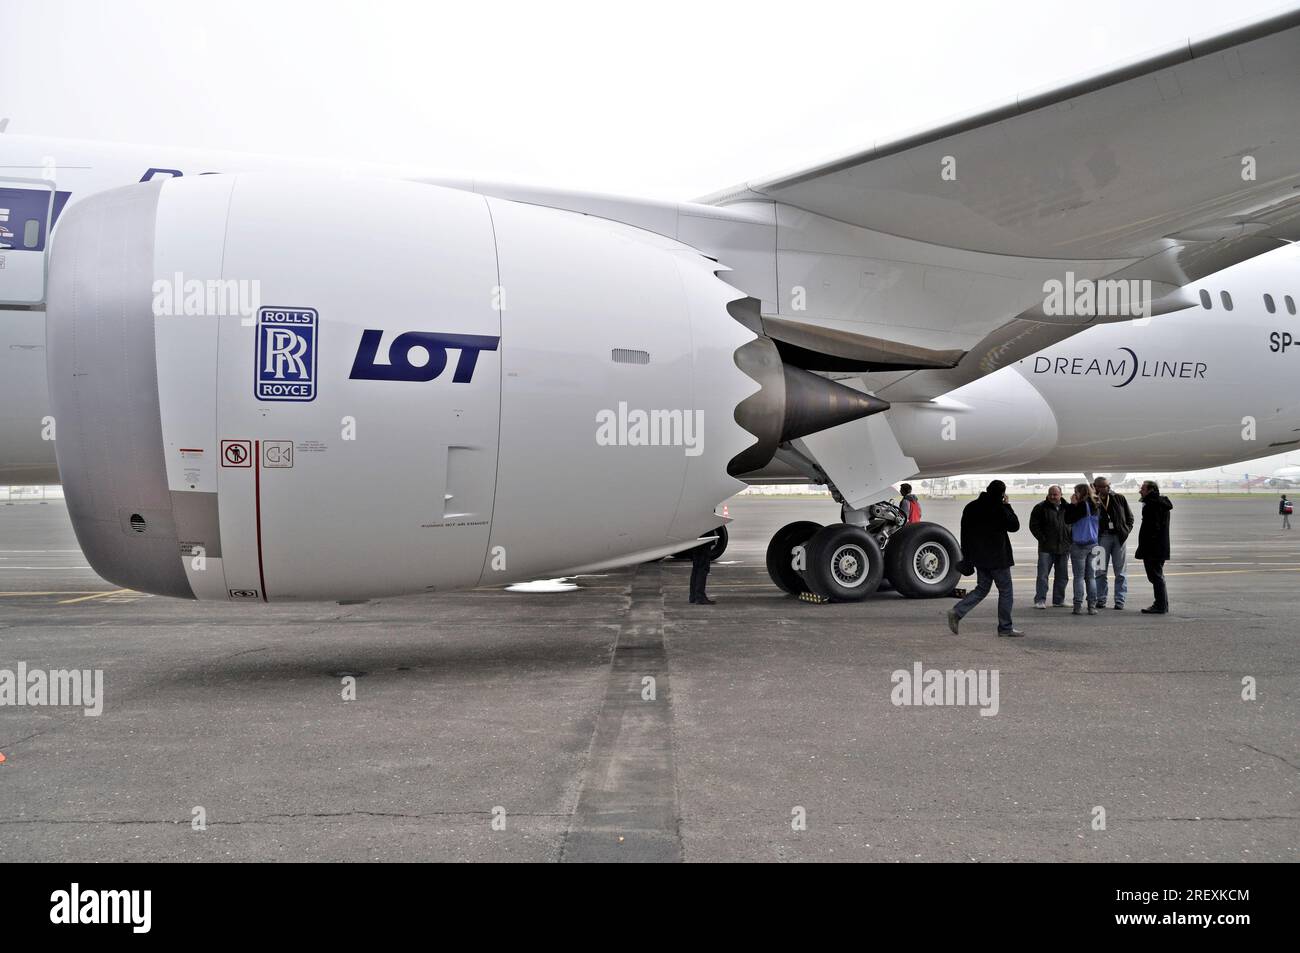 The Rolls Royce engine of the Boeing 787 Dreamliner - airliner of the LOT Polish Airlines at Chopin Airport Stock Photo